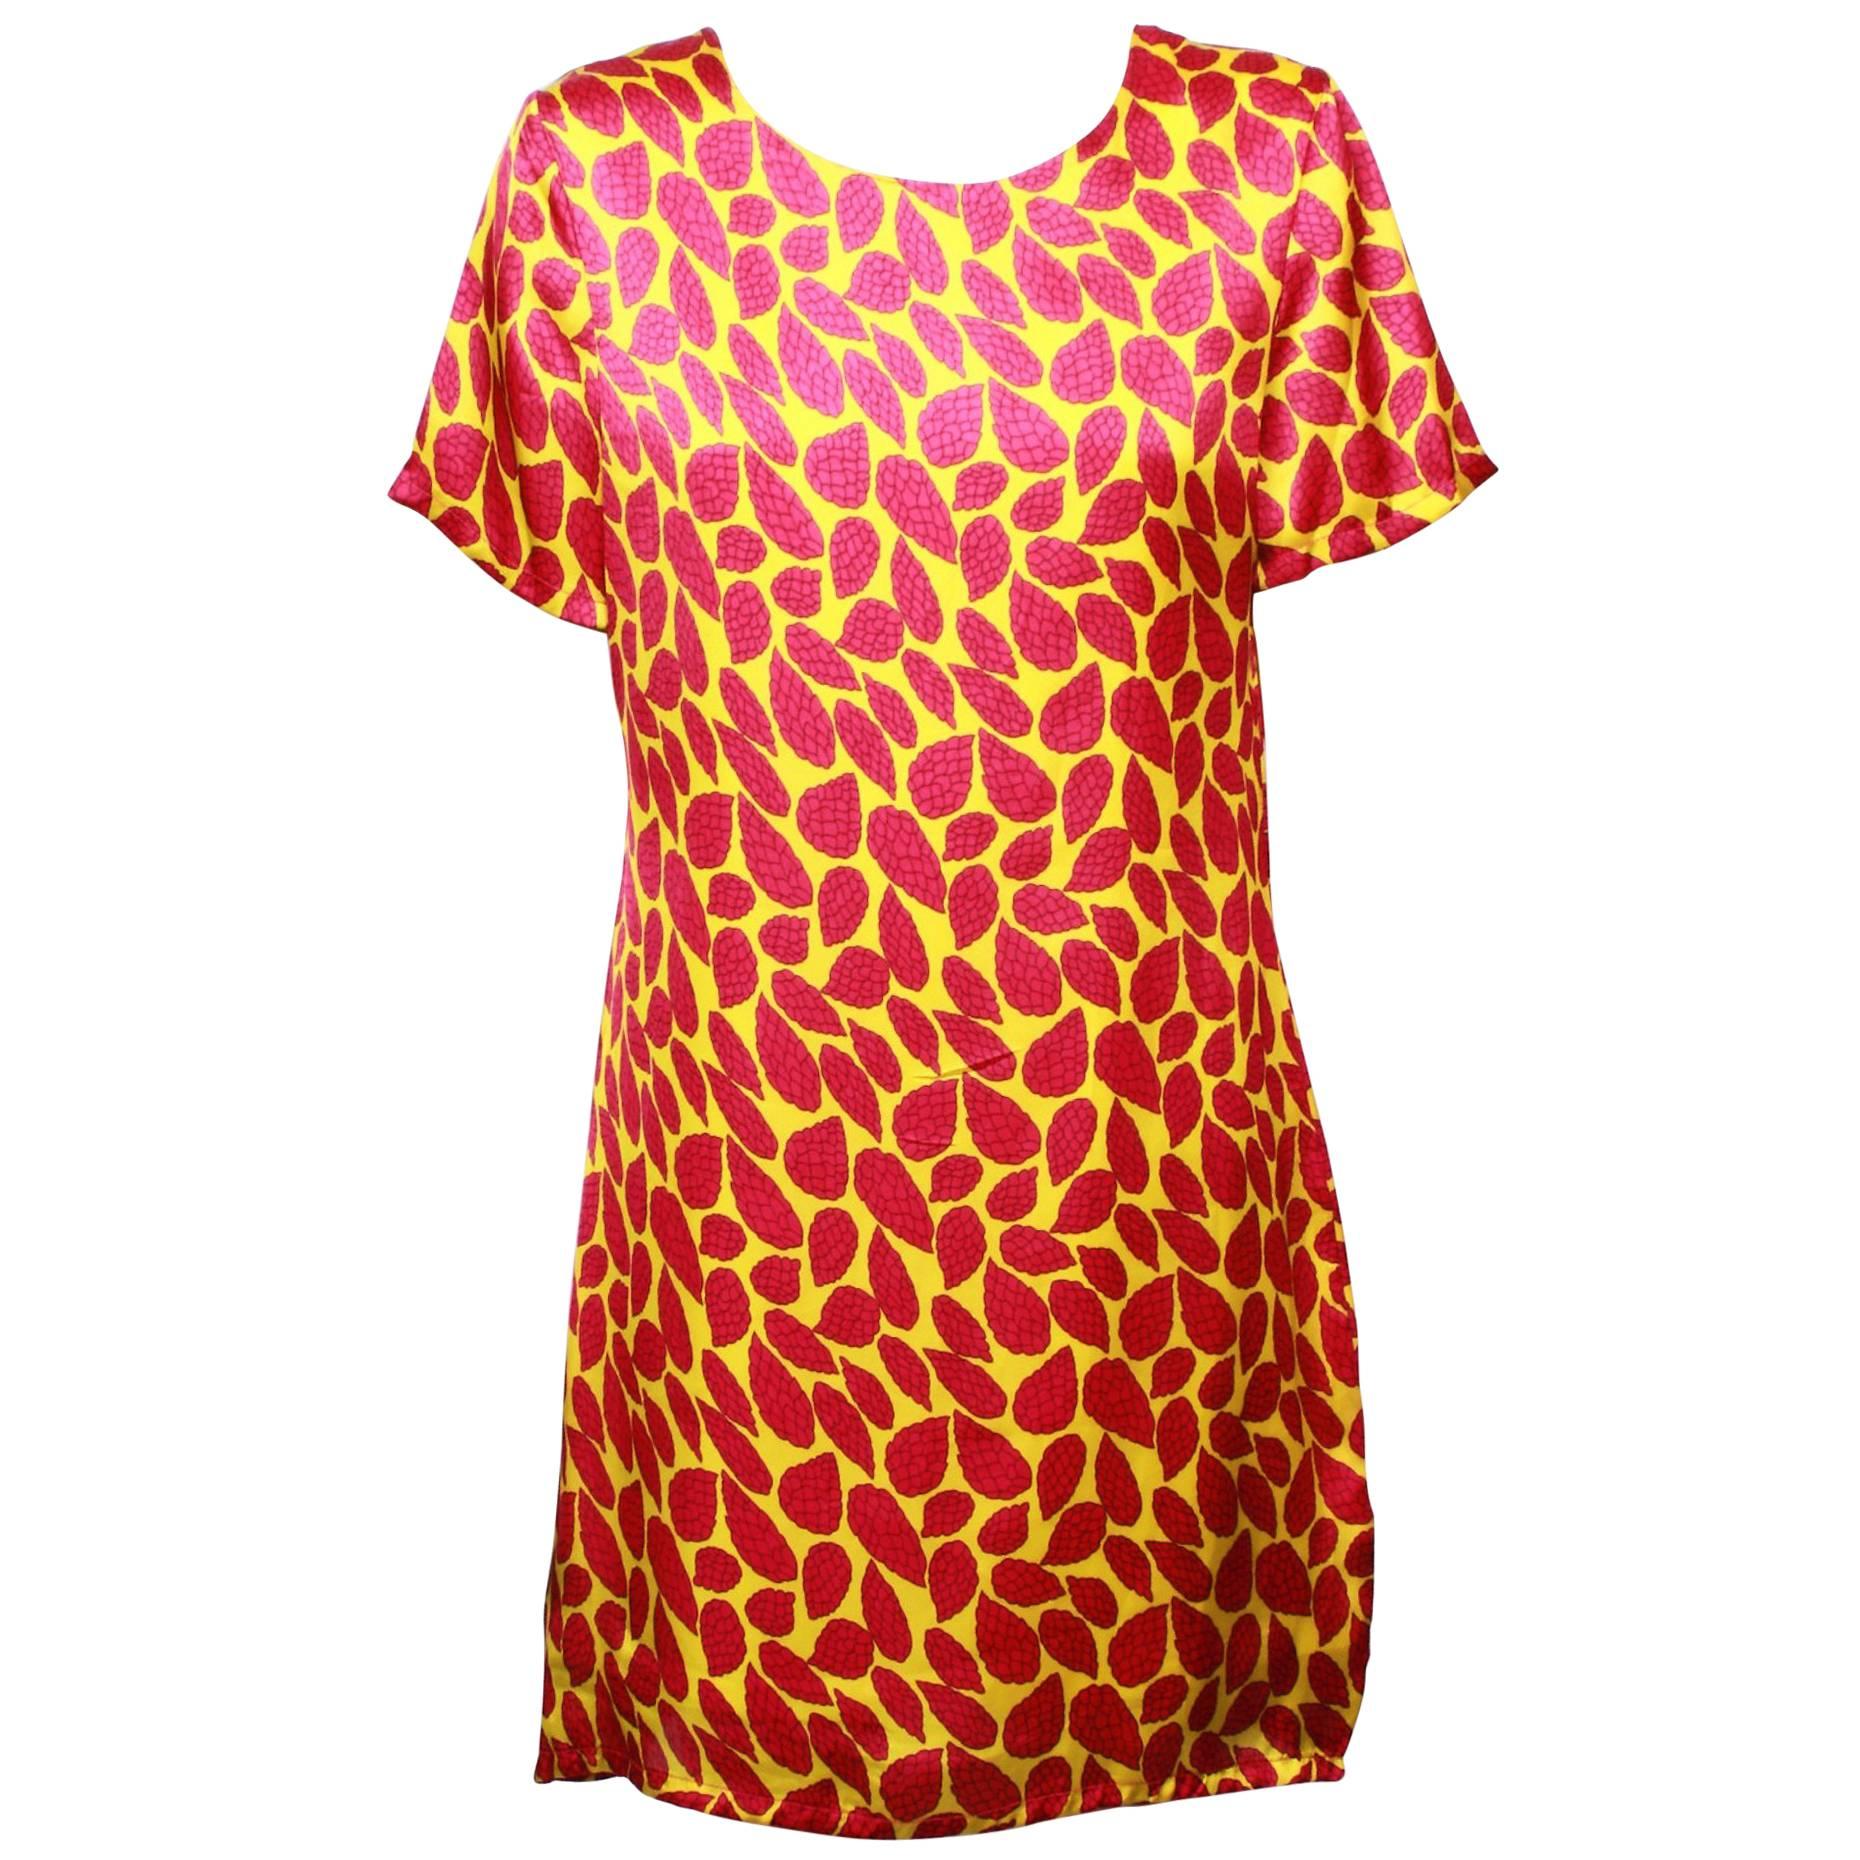  Love Moschino Printed Shift Dress For Sale